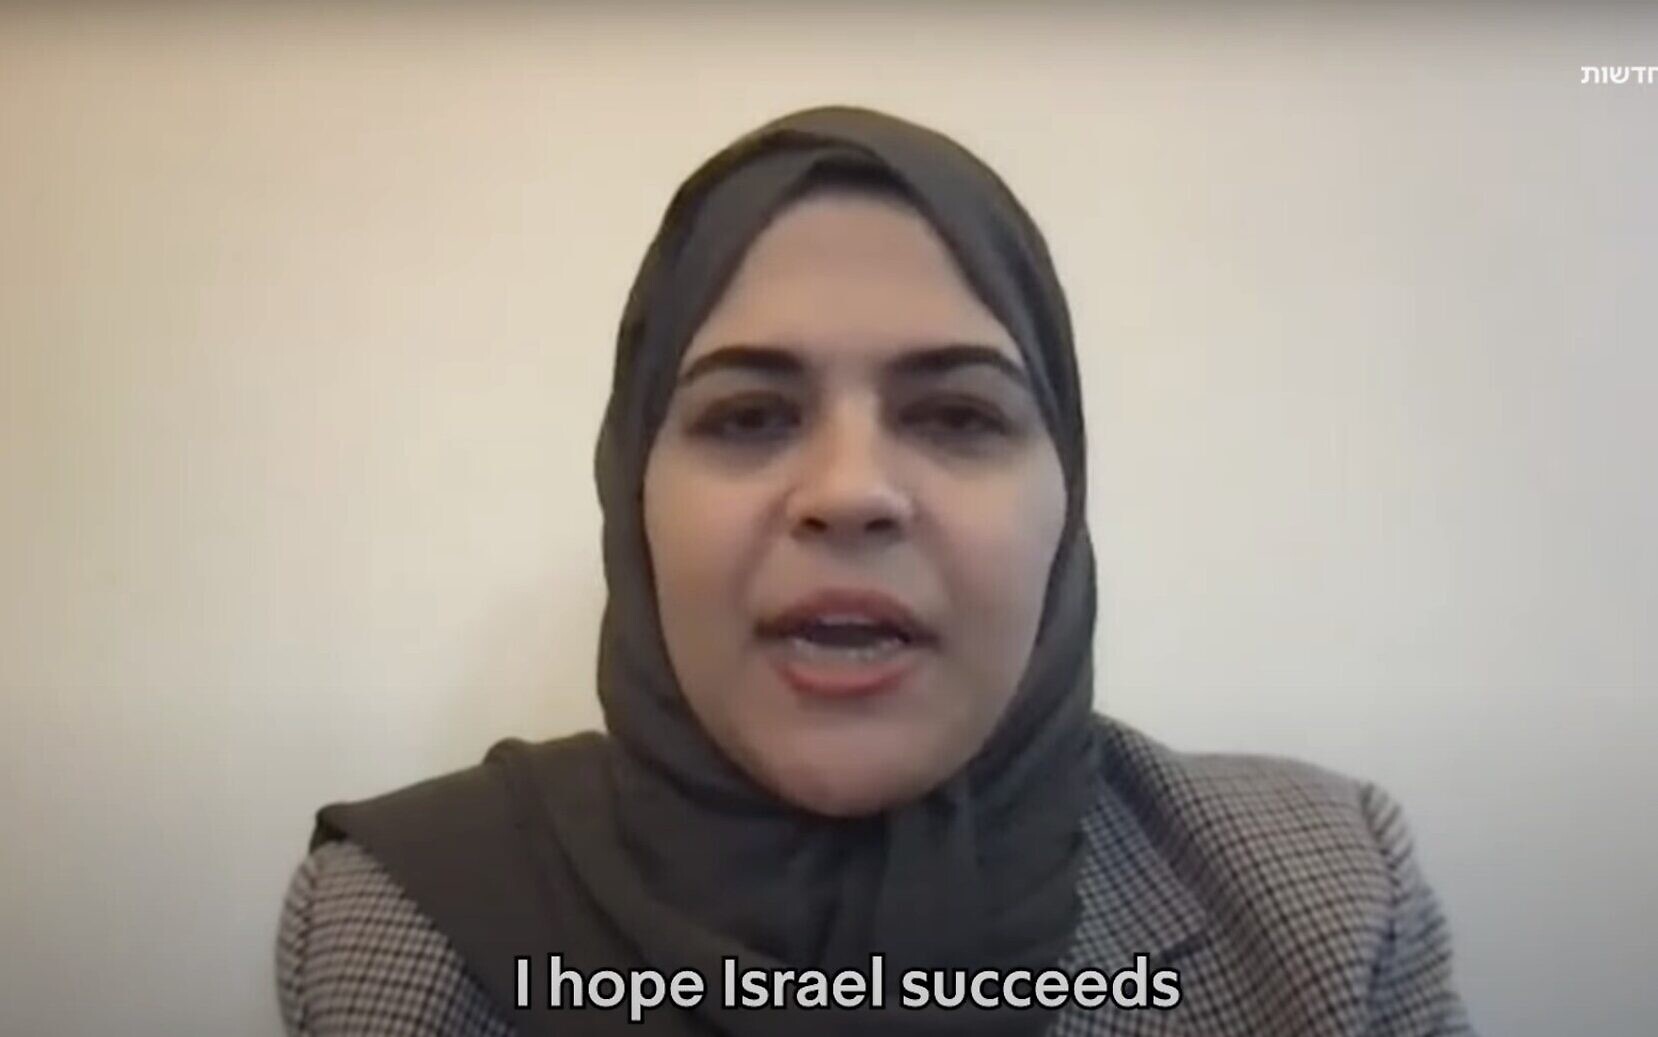 Egyptian author, a liberal activist, forced to flee for backing Israel over  Hamas